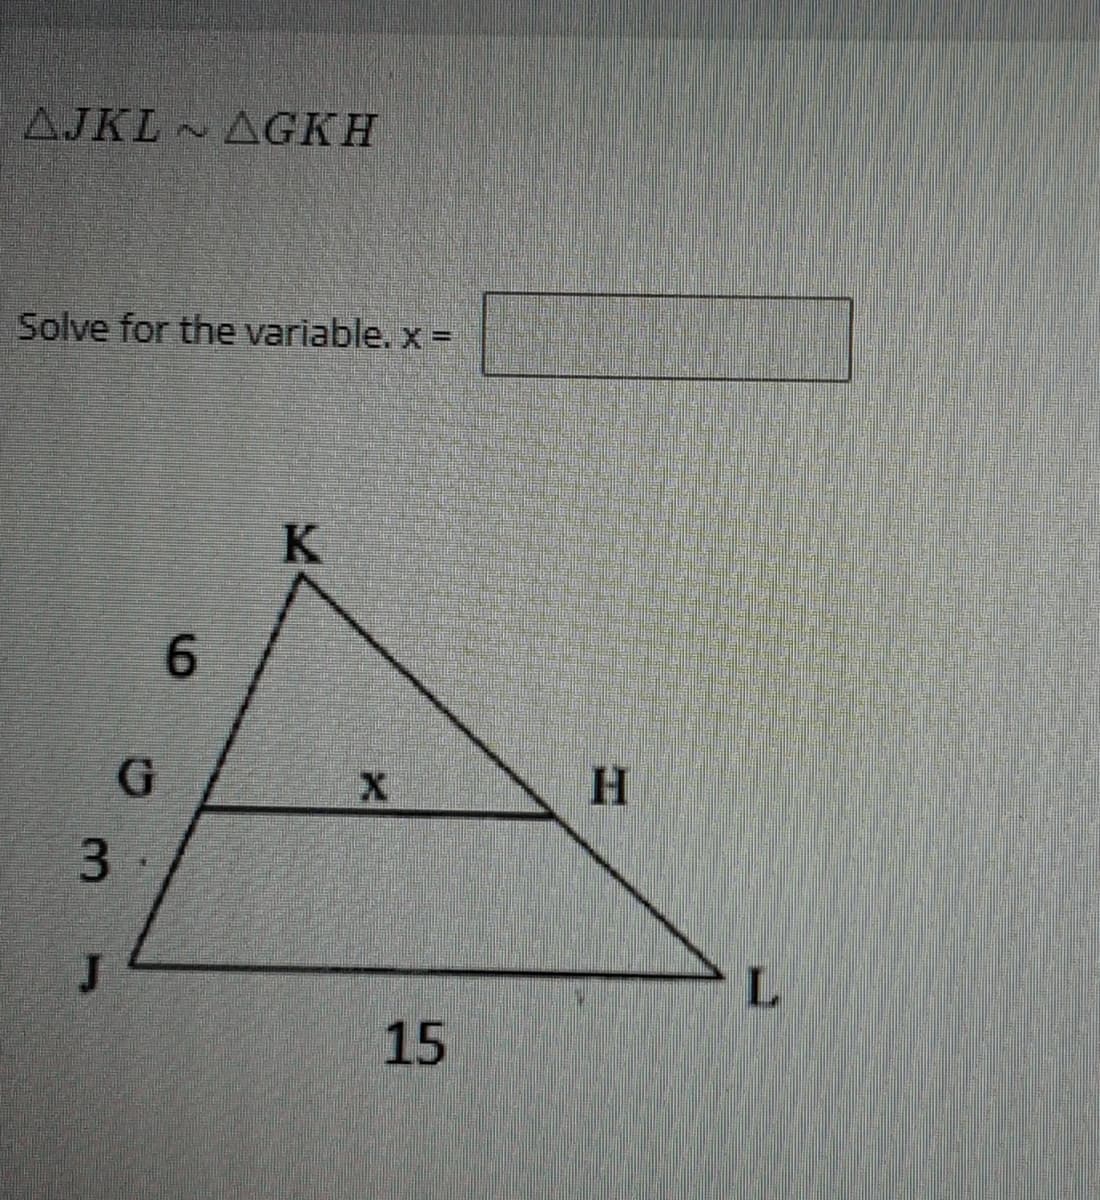 AJKL AGKH
Solve for the variable. x =
K
6.
H
15
